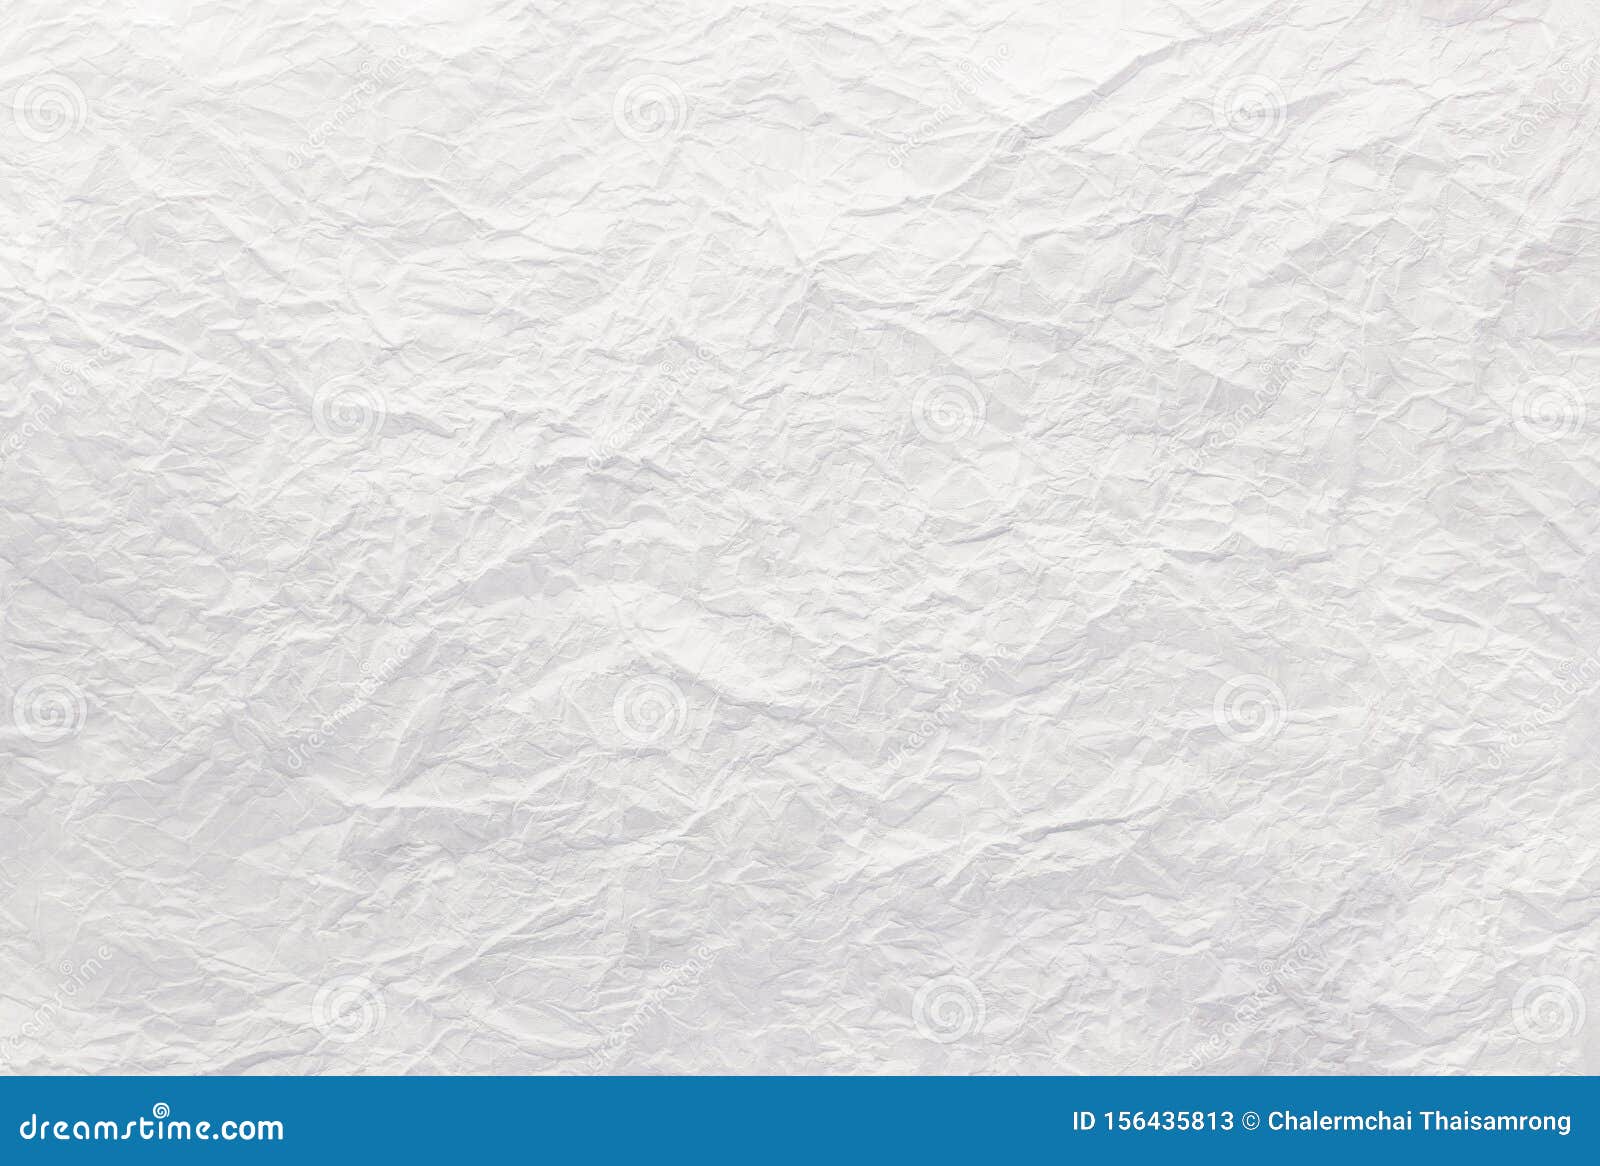 closeup to white crumpled paper texture background,abstract